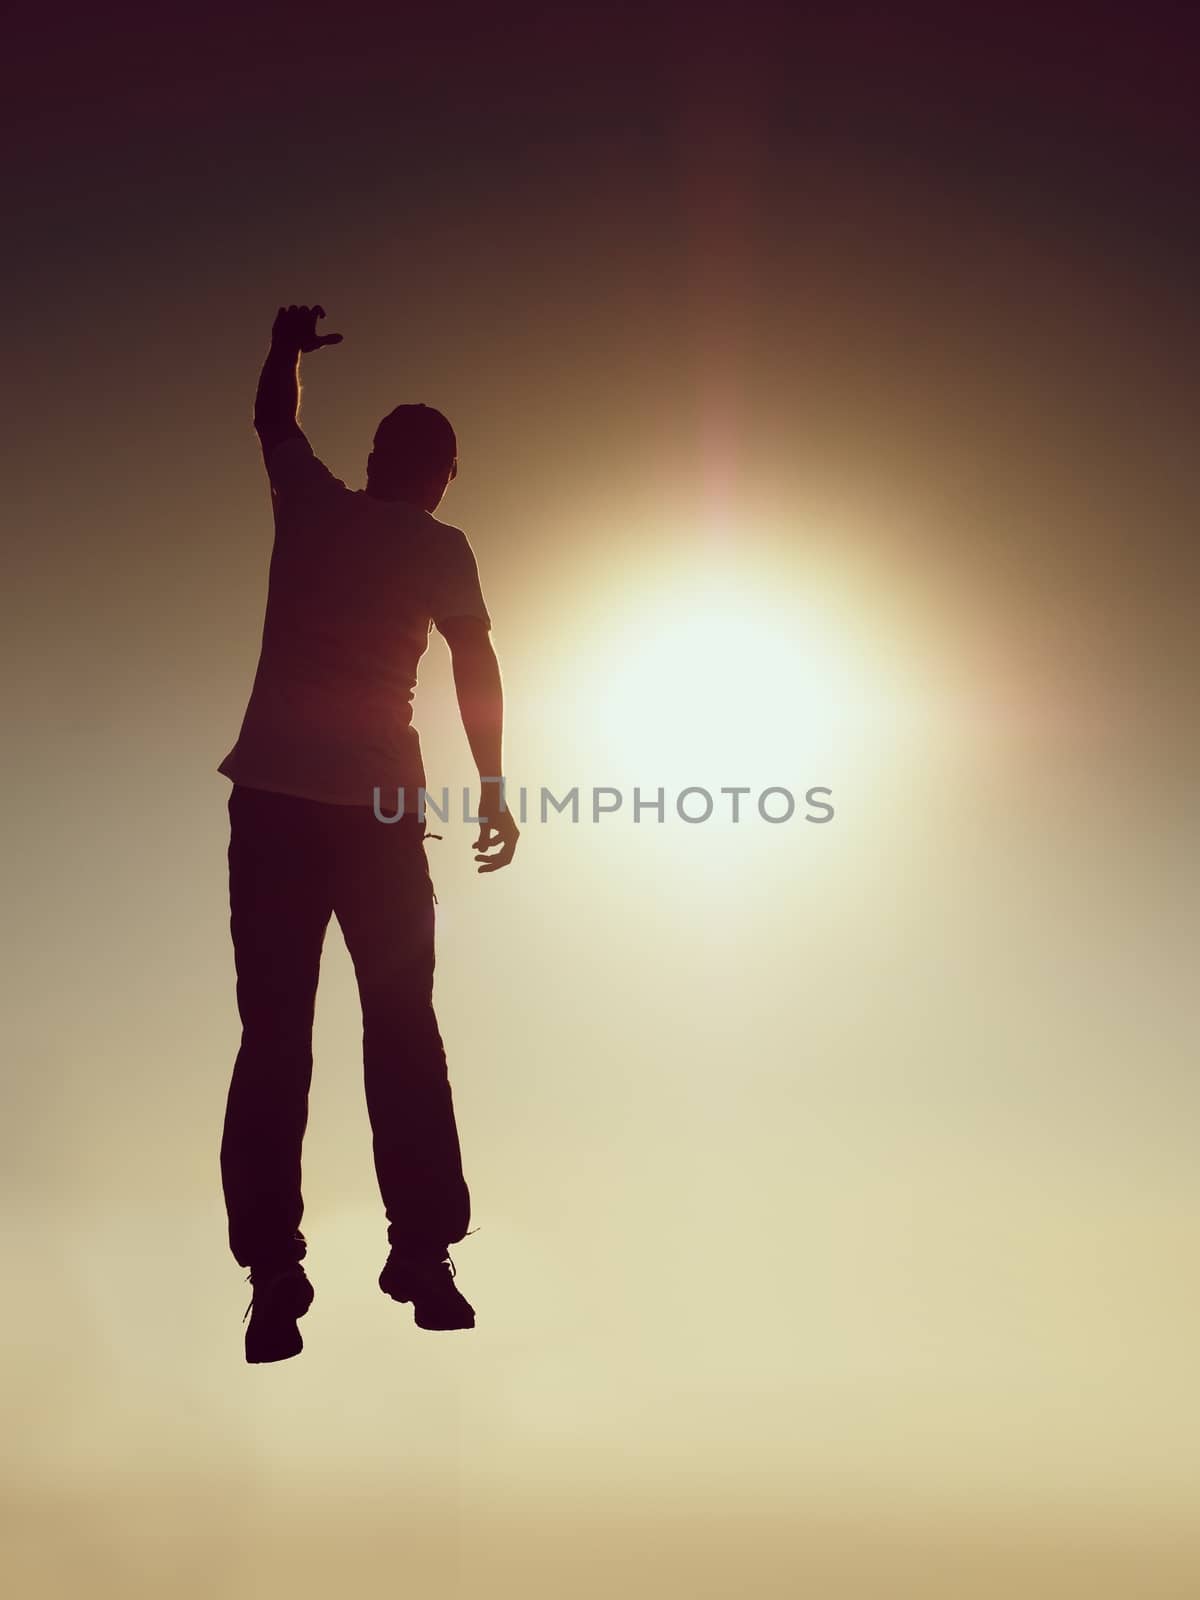 Jumping man. Young crazy man is jumping on red sky background.Silhouette of jumping man and beautiful sunset sky. Element of design by rdonar2